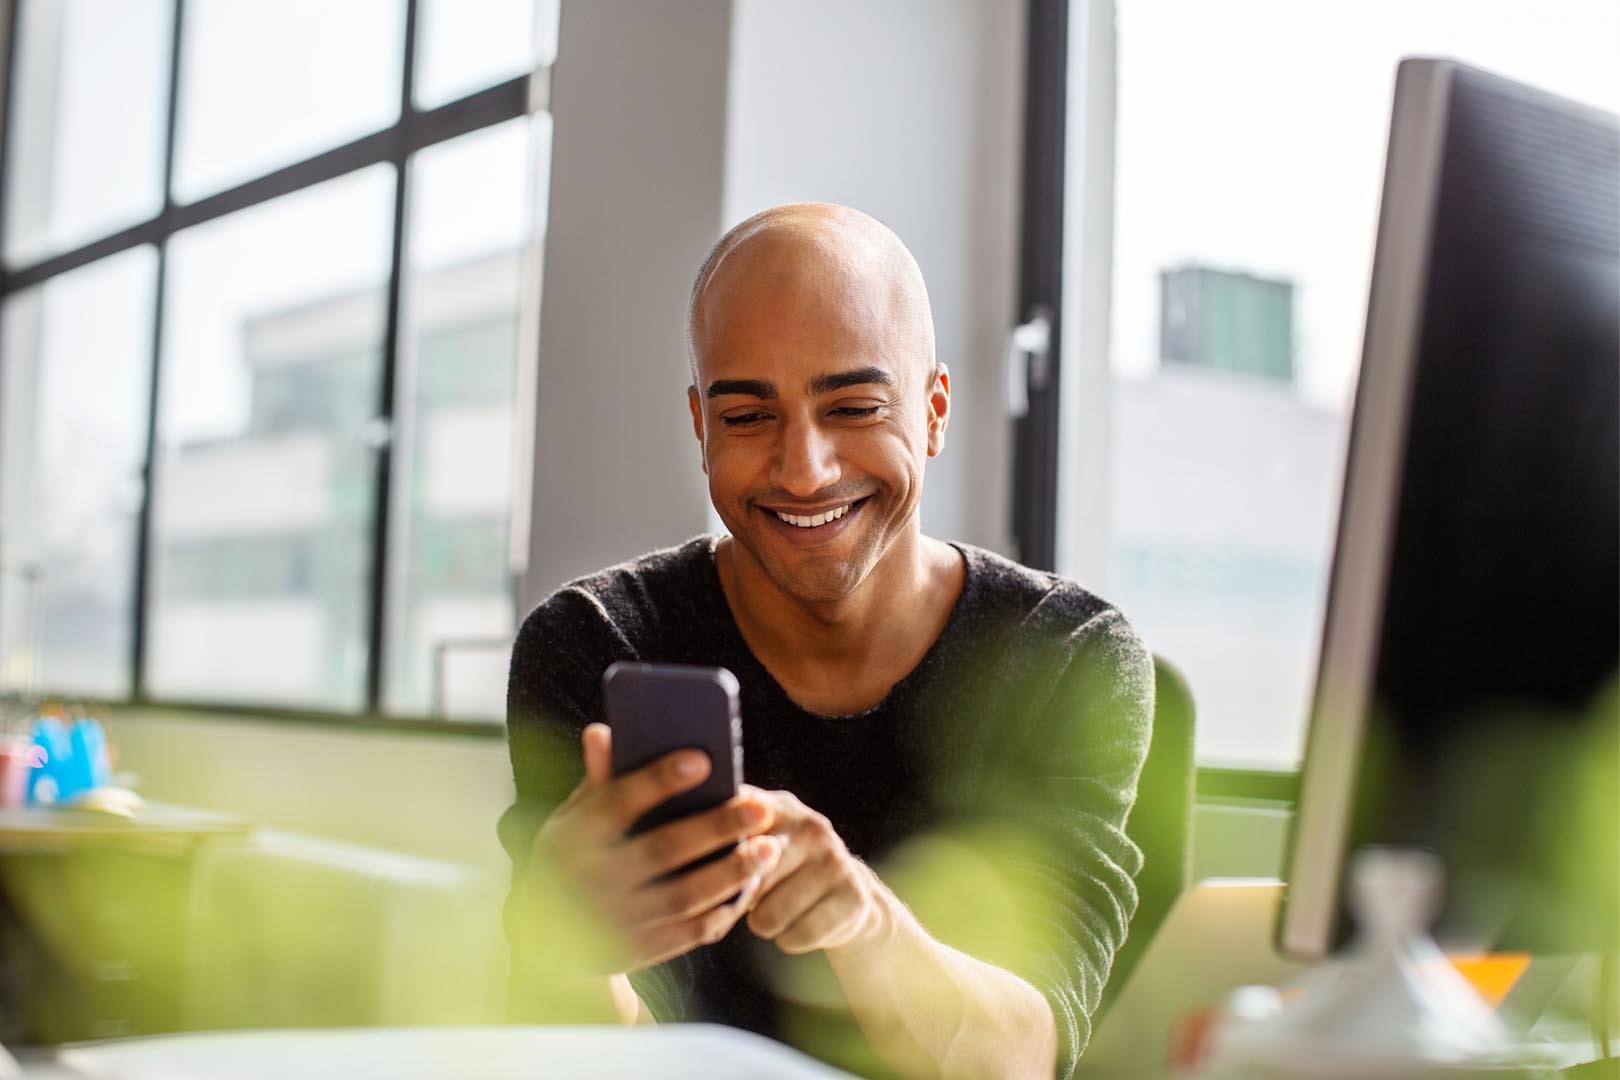 Man holding a phone, looking at it and smiling